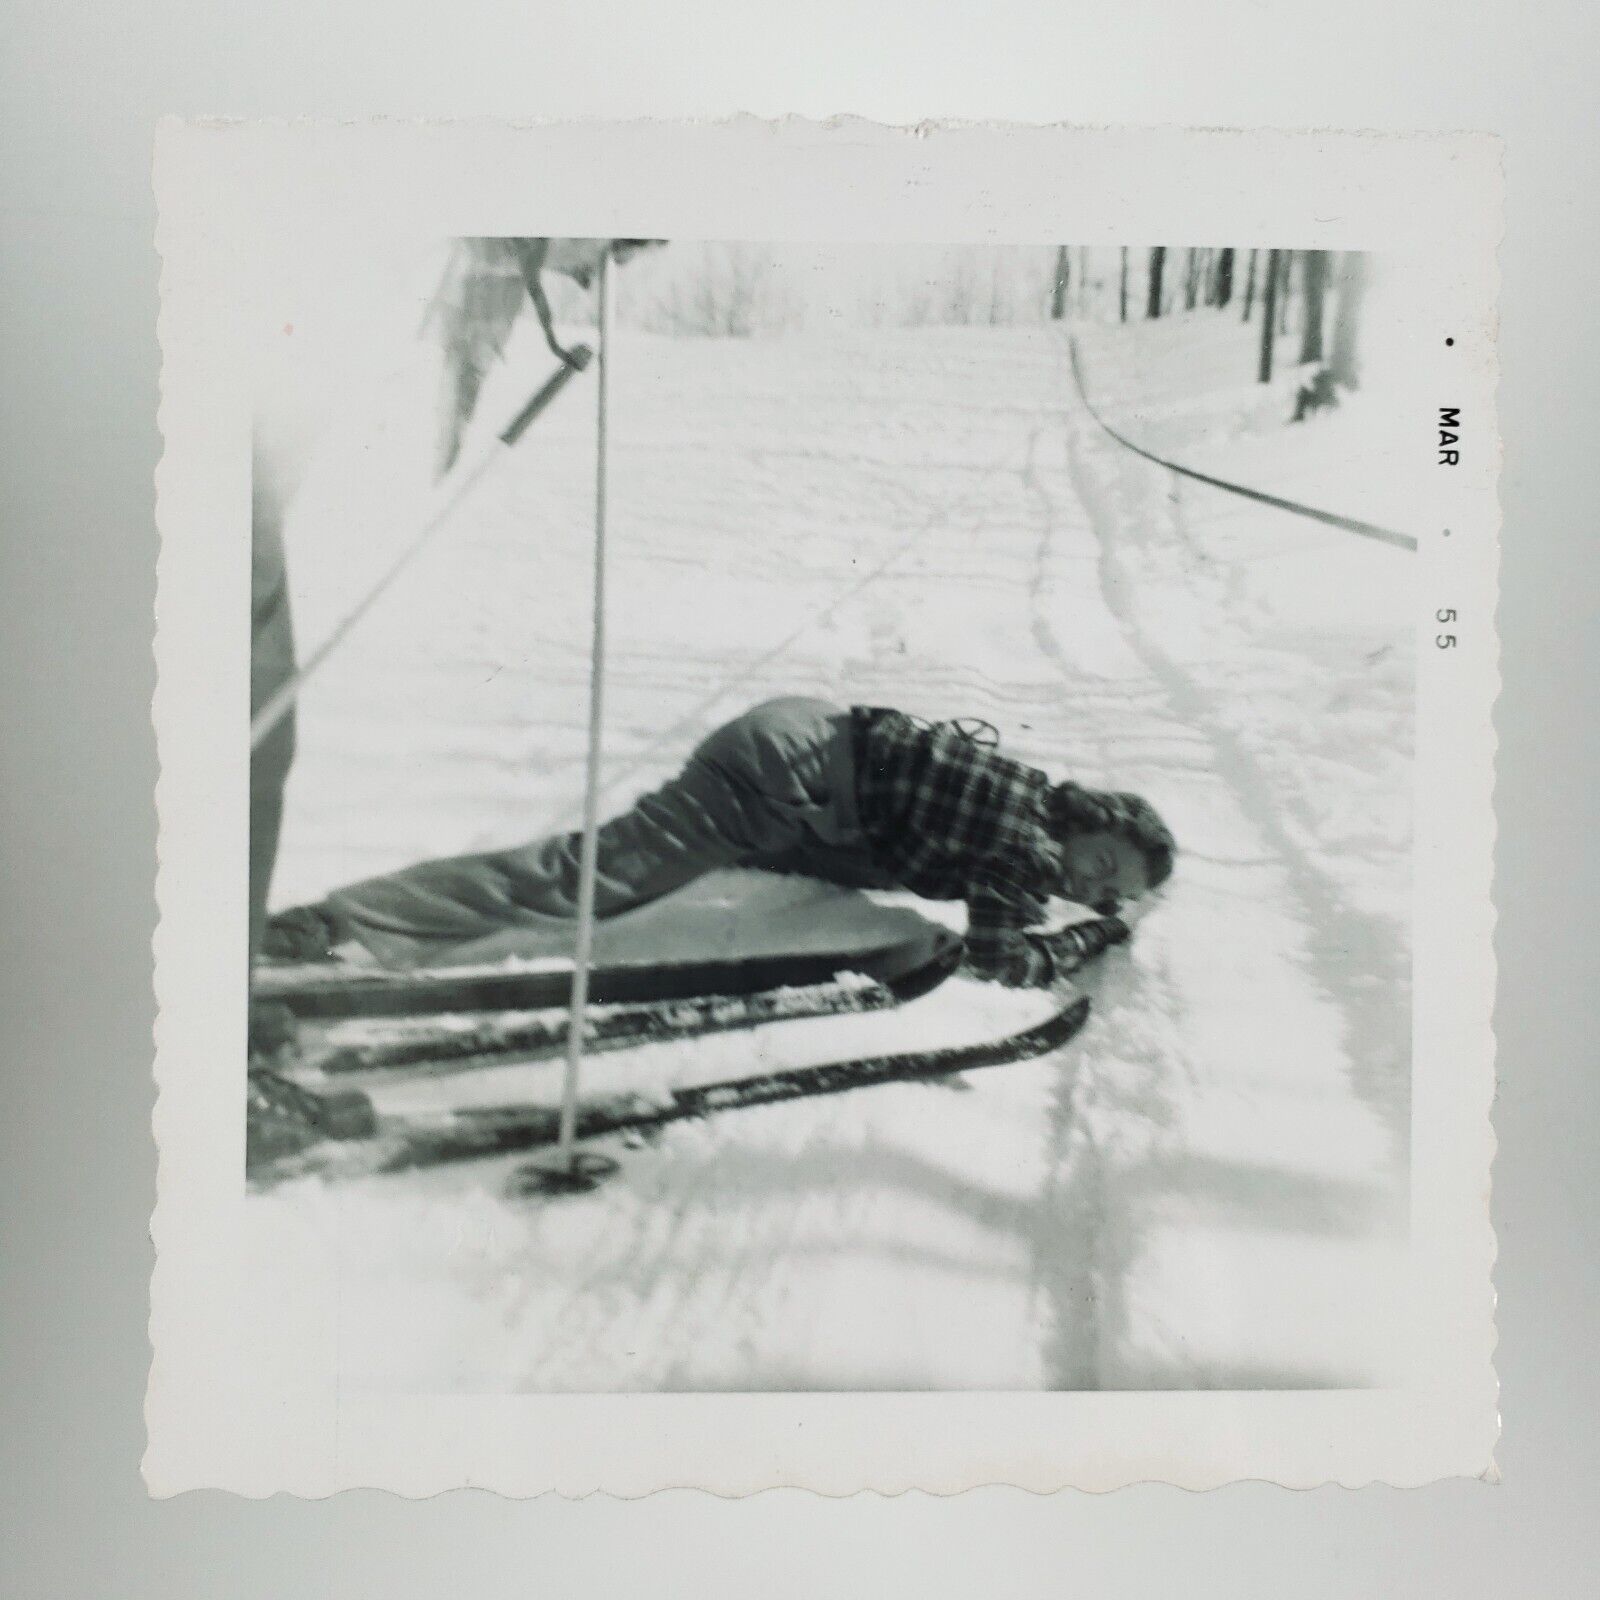 Laughing Woman Ski Accident Photo 1950s Cross Country Disaster Snapshot A4217